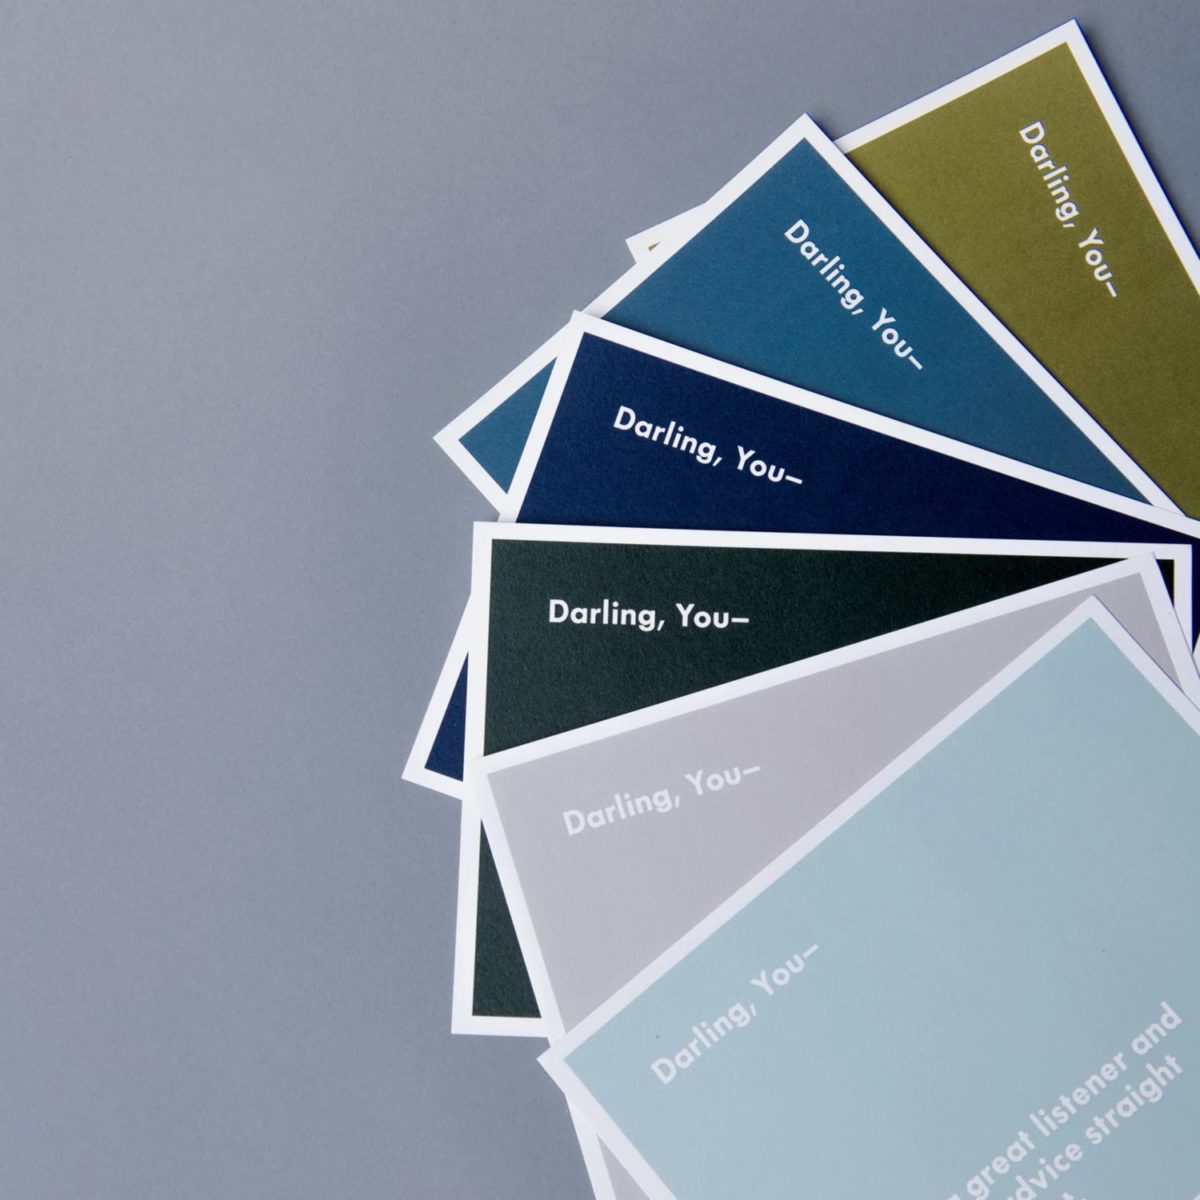 A set of cards splayed out on a table that say, "Darling, You-"